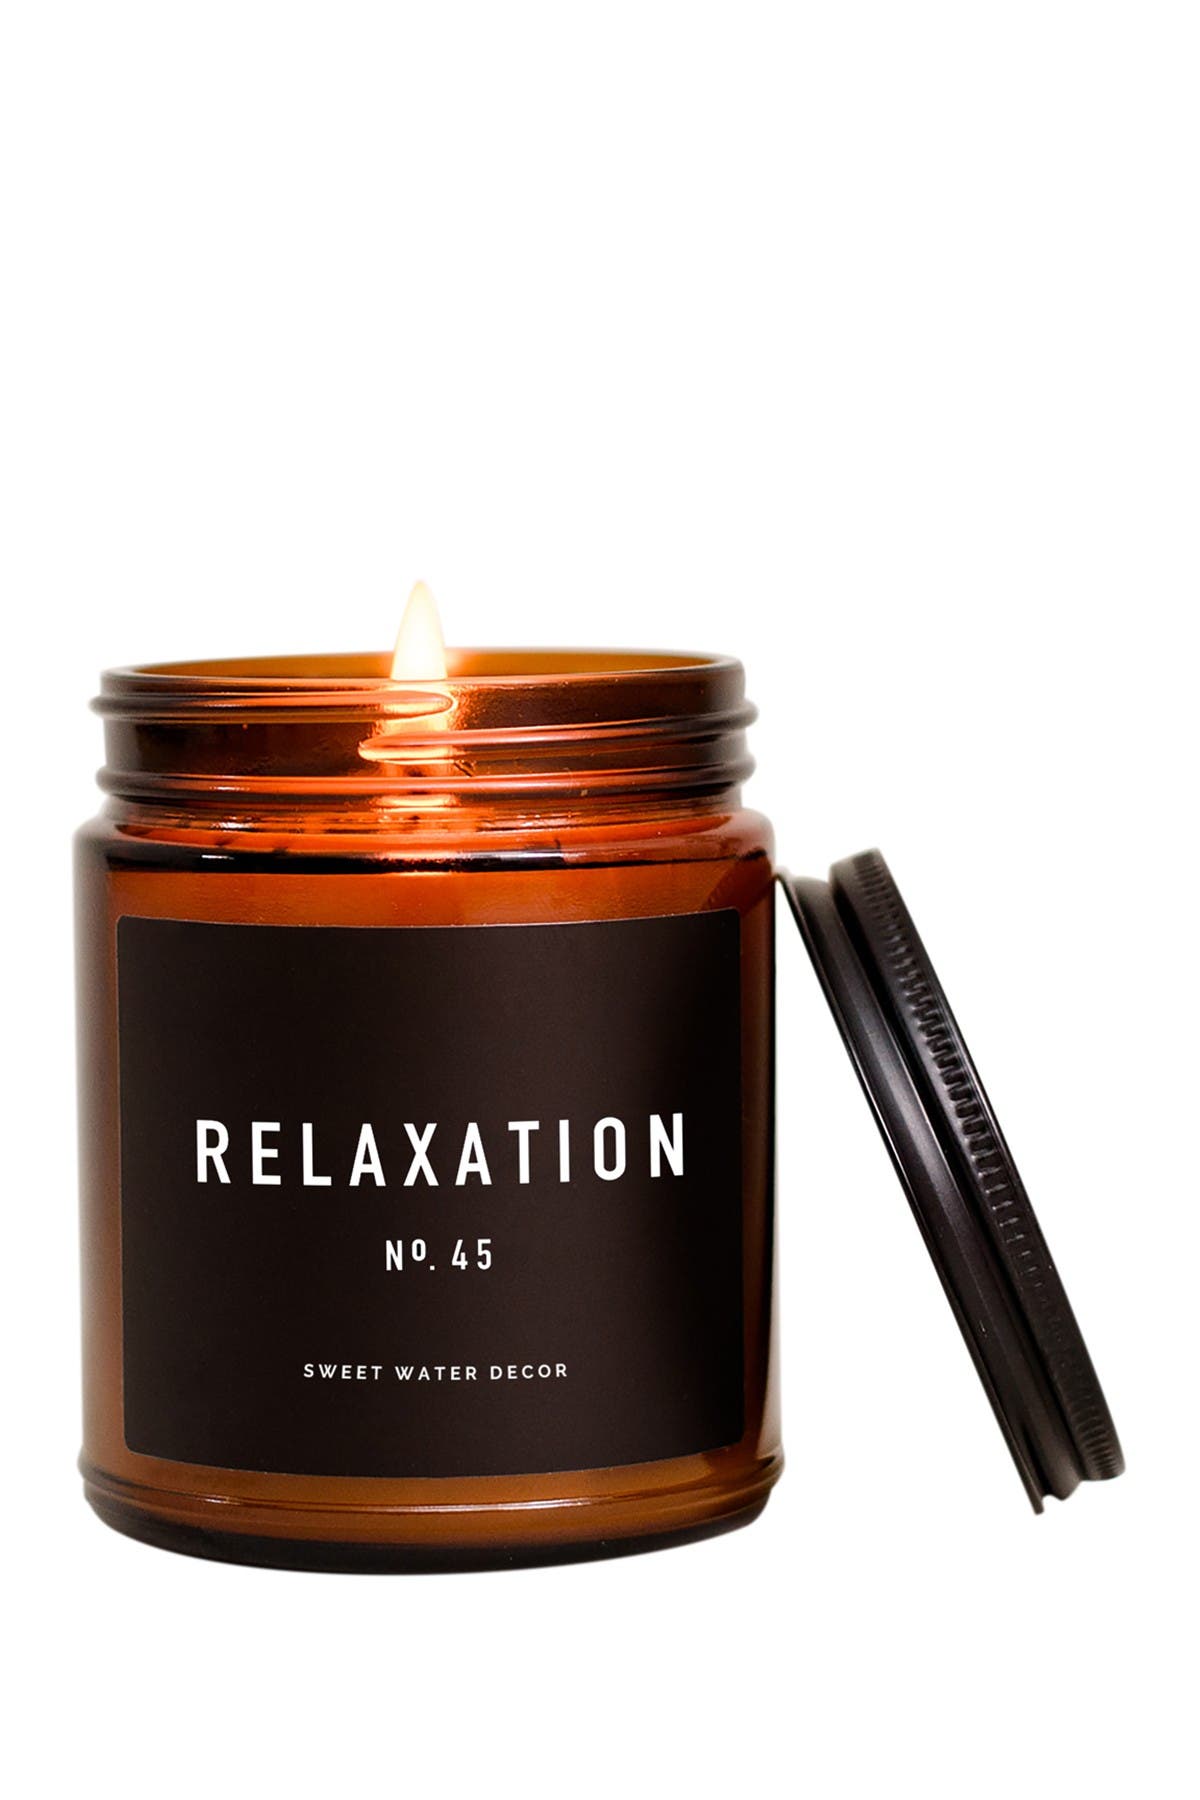 Sweet Water Decor Relaxation Amber Jar 9 Oz. Soy Candle In Open Miscellaneous